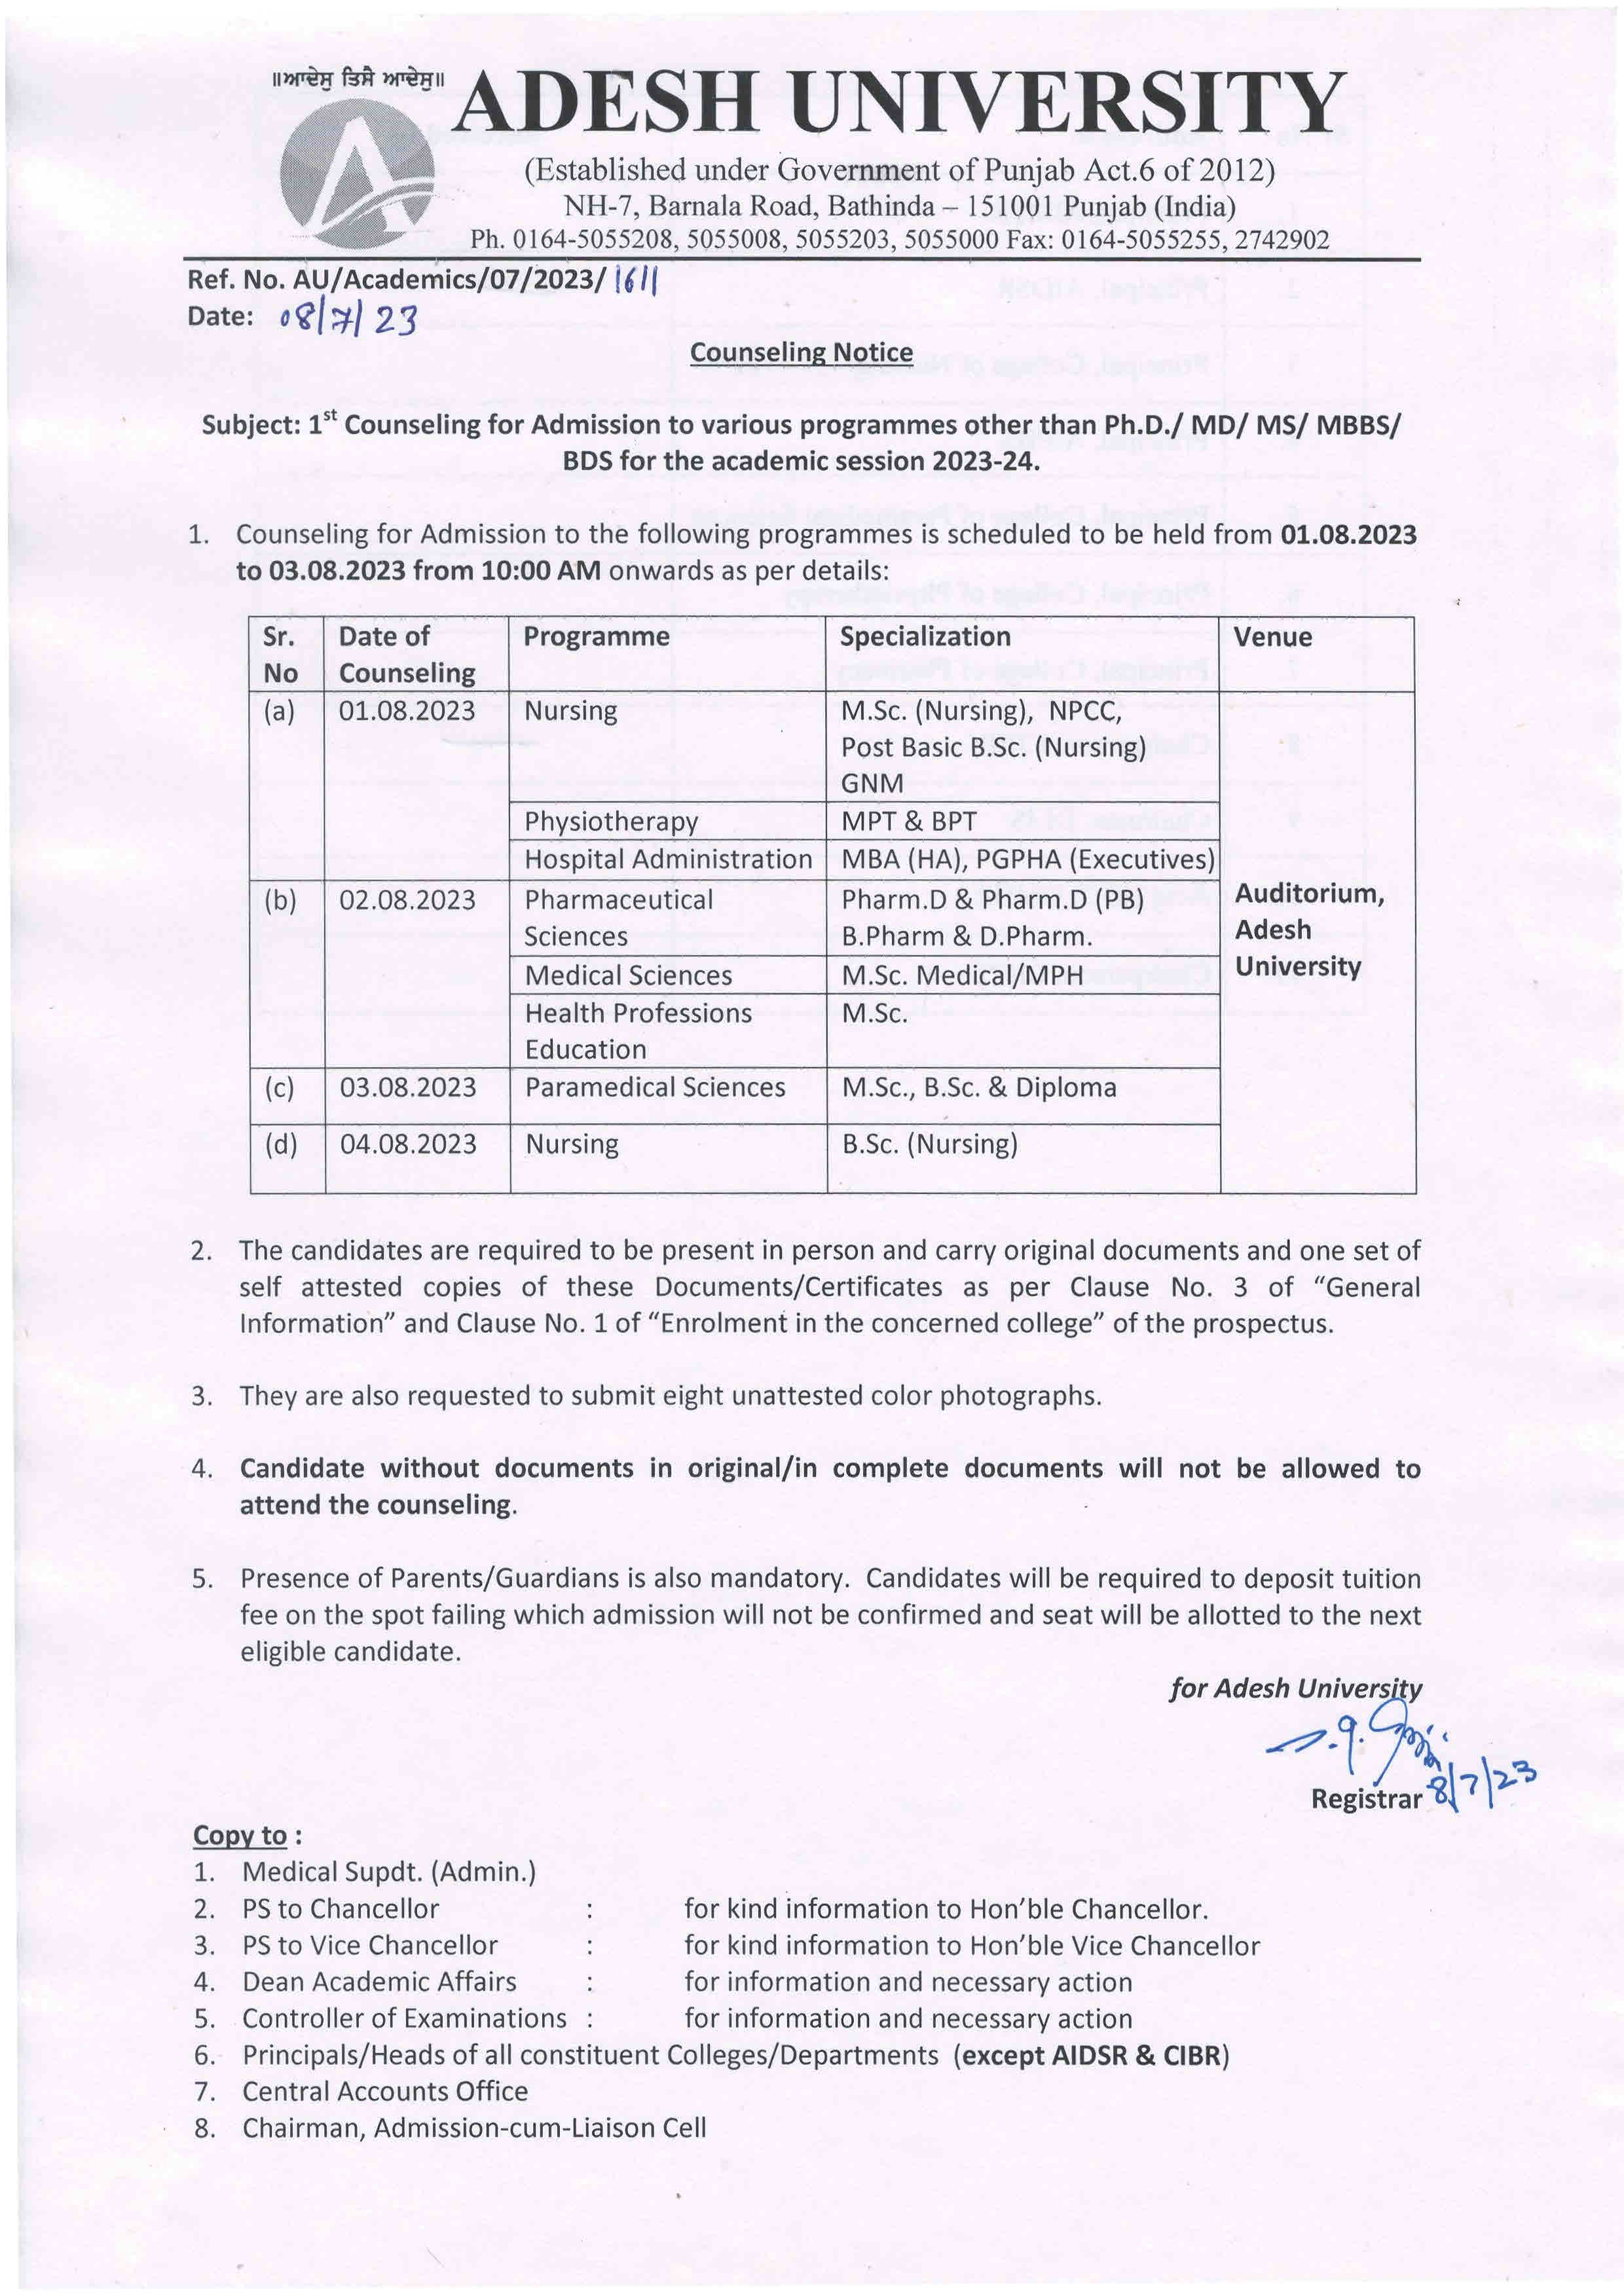 Counseling Notice for Admission to Various Programme 2023